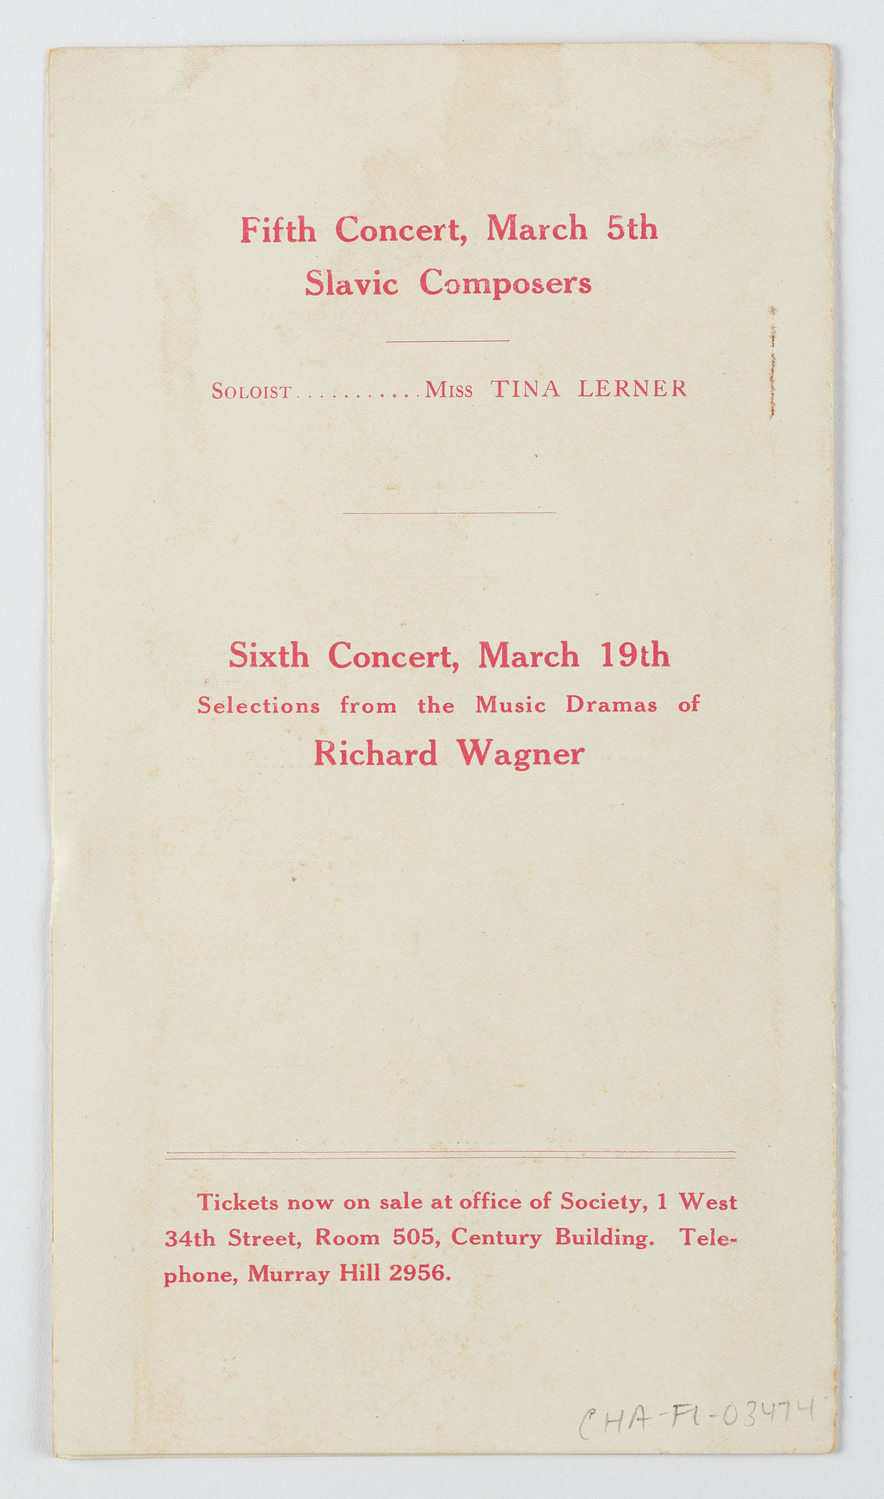 Symphony Concert for Young People, 1910